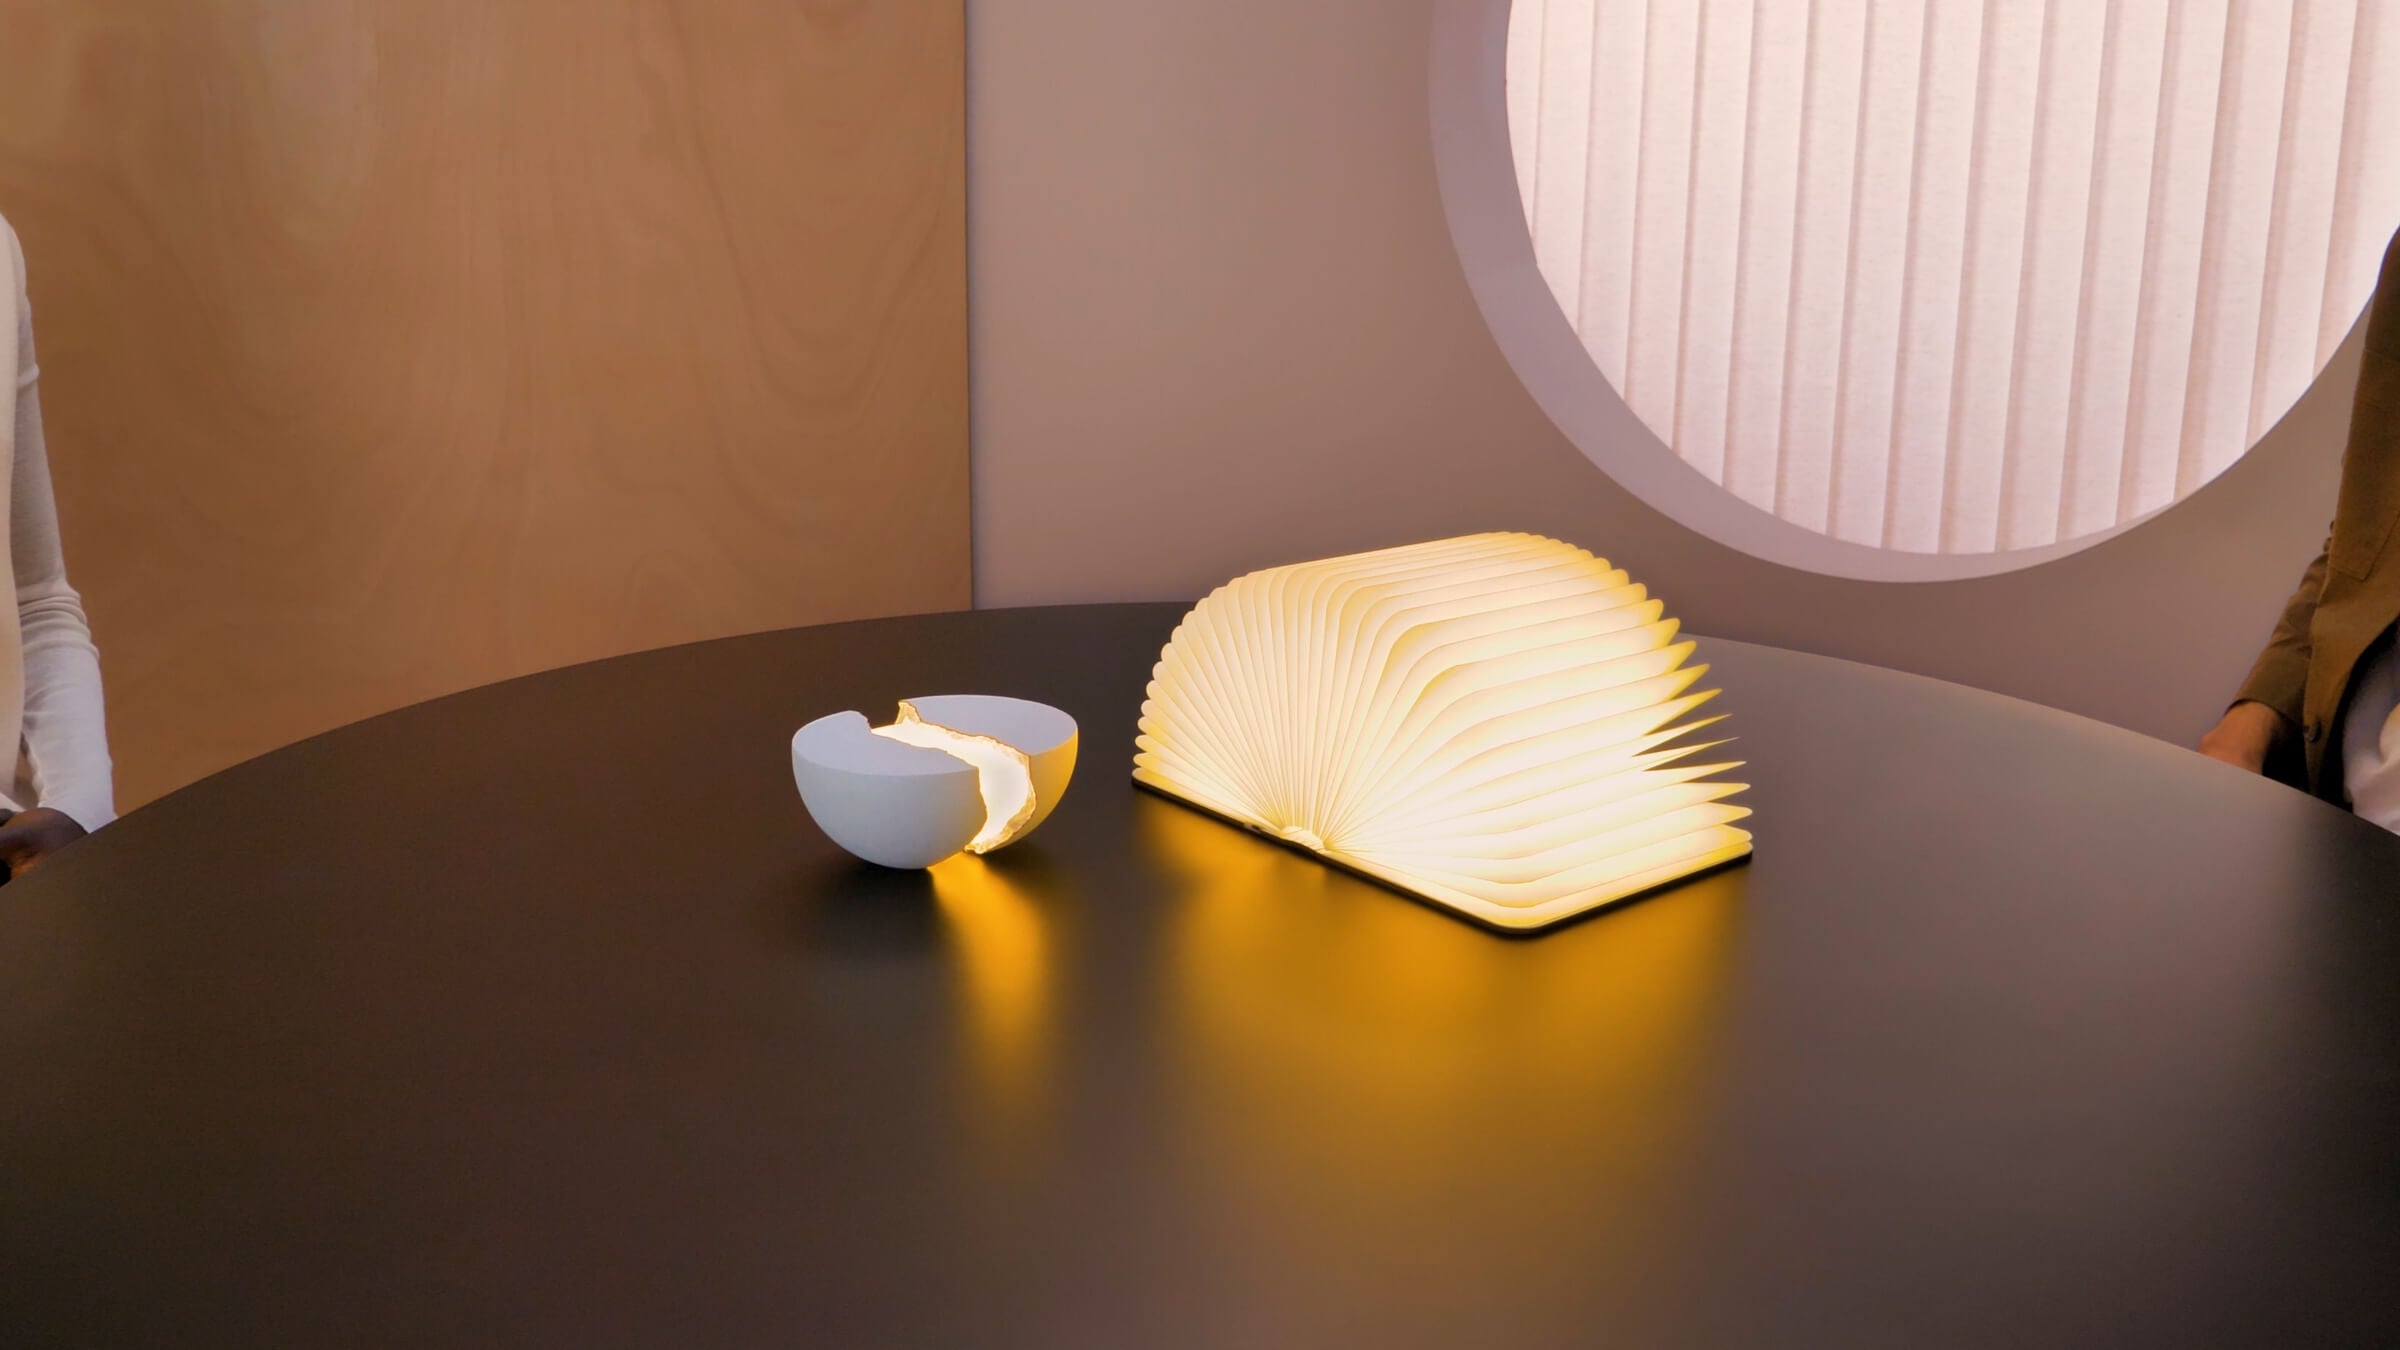 Portable lamps and lightning from Audo